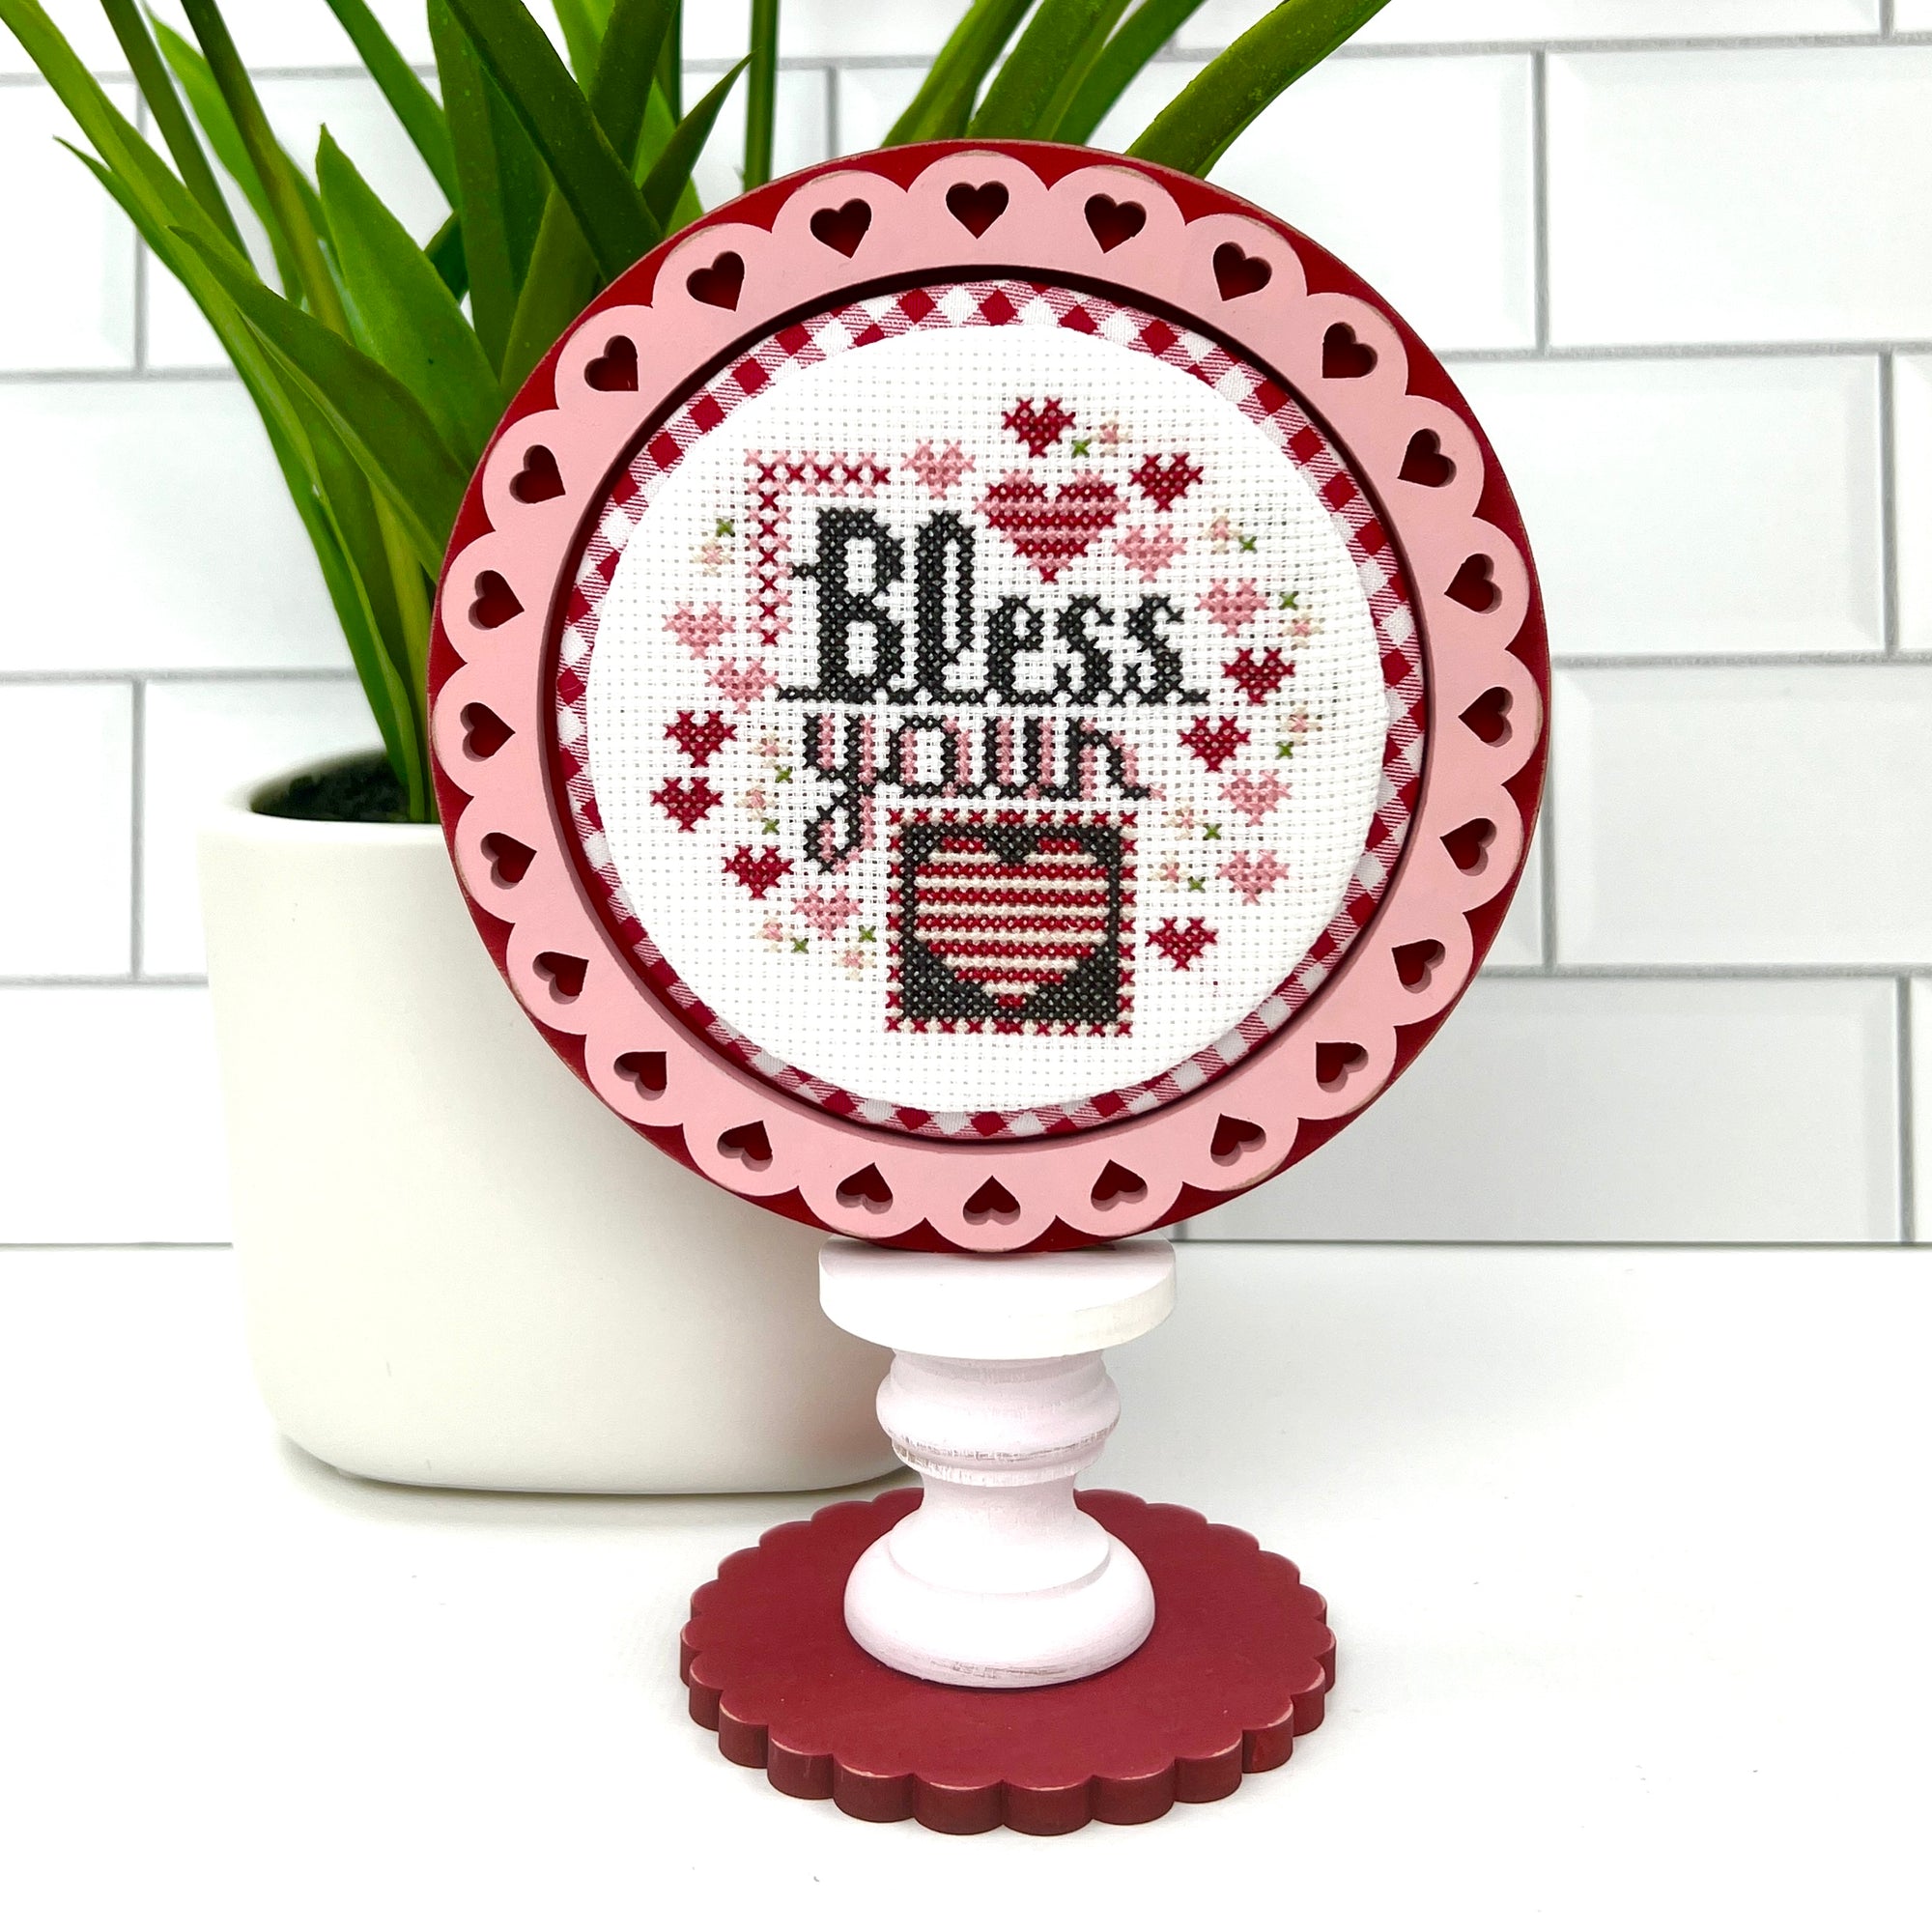 Wood round decorative frame with hearts for displaying a finished cross stitch piece 